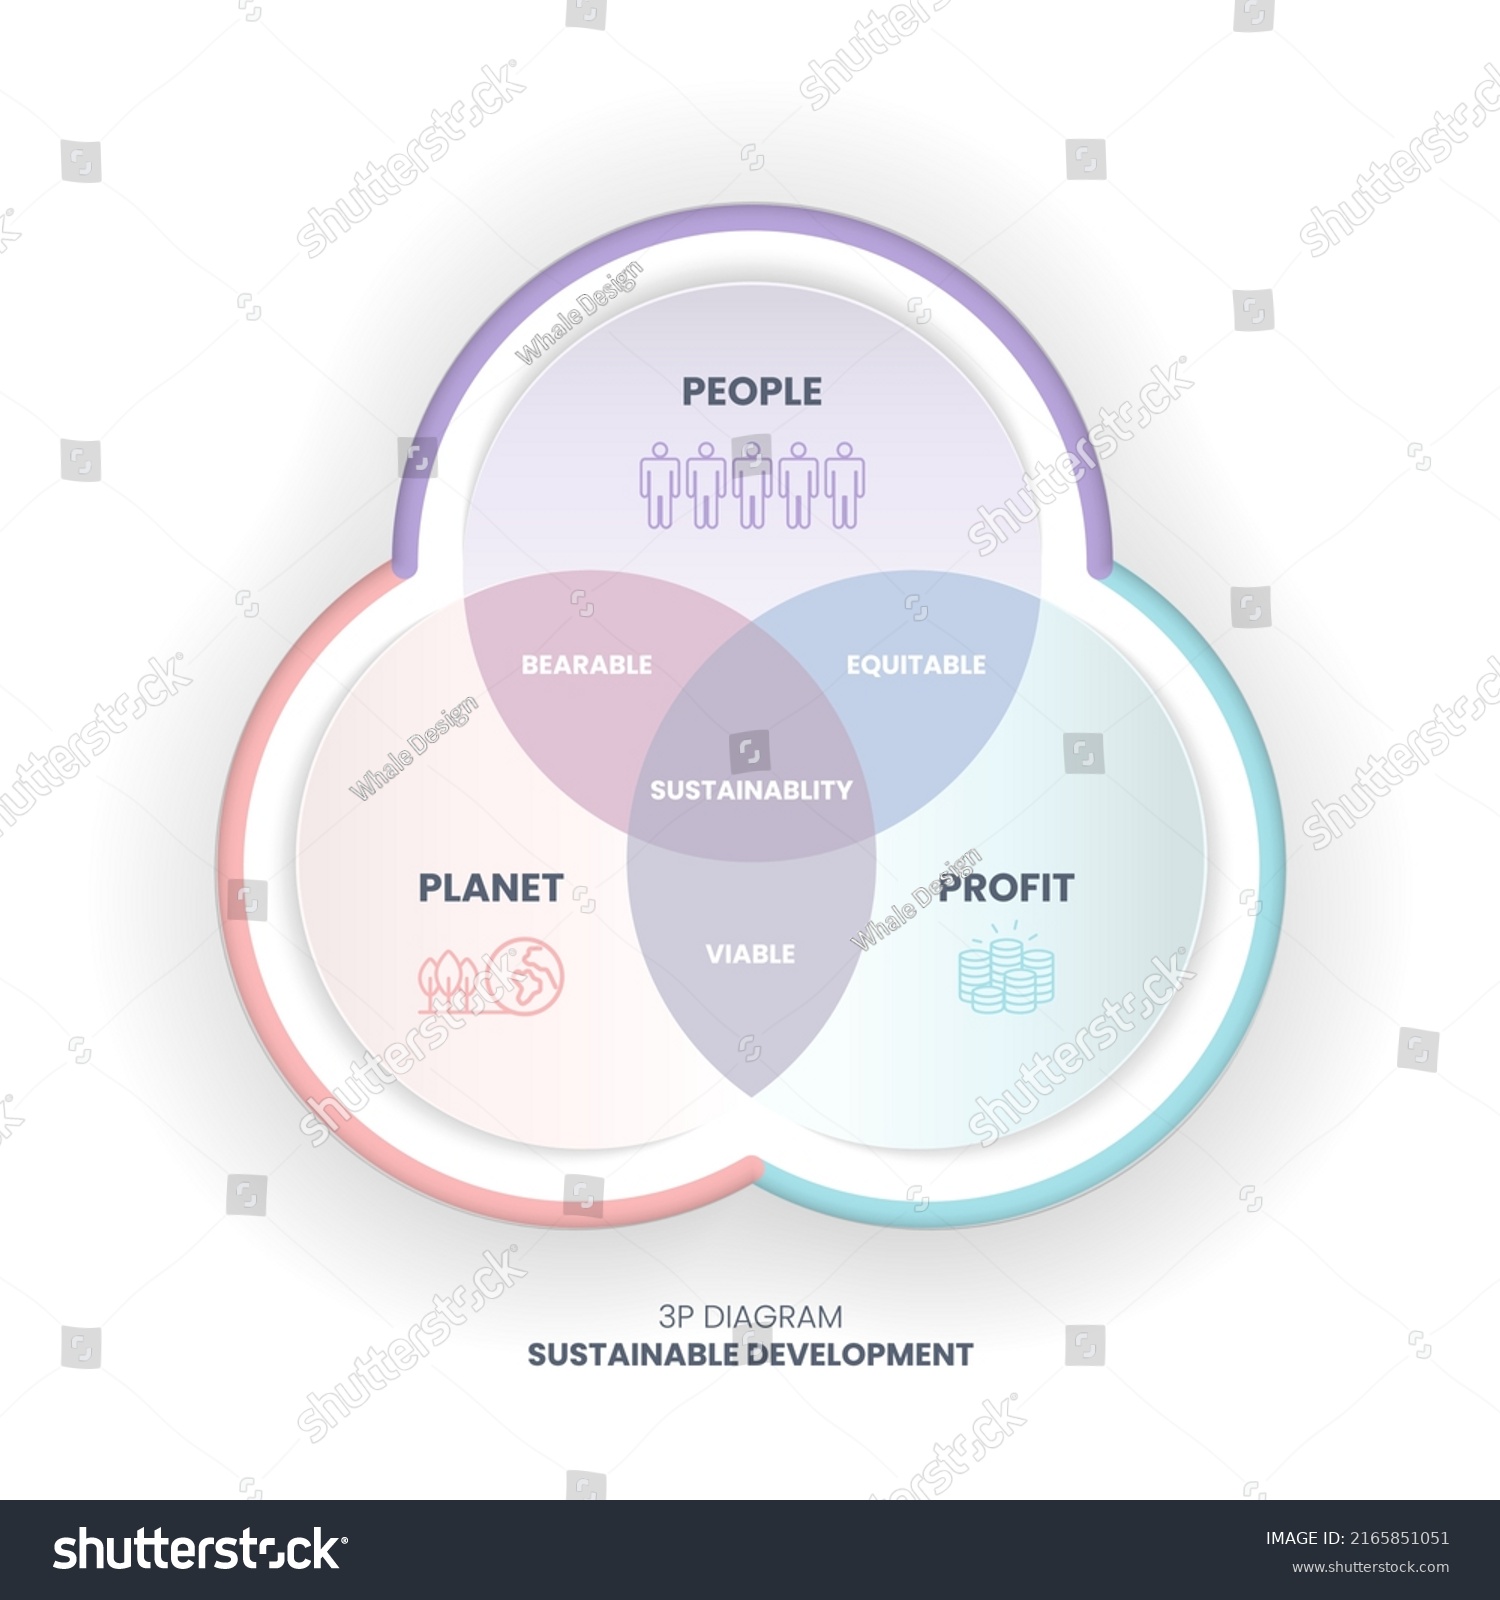 The 3P sustainability diagram has 3 elements: people, planet, and profit. The intersection of them has bearable, viable, and equitable dimensions for the sustainable development goals or SDGs  #2165851051